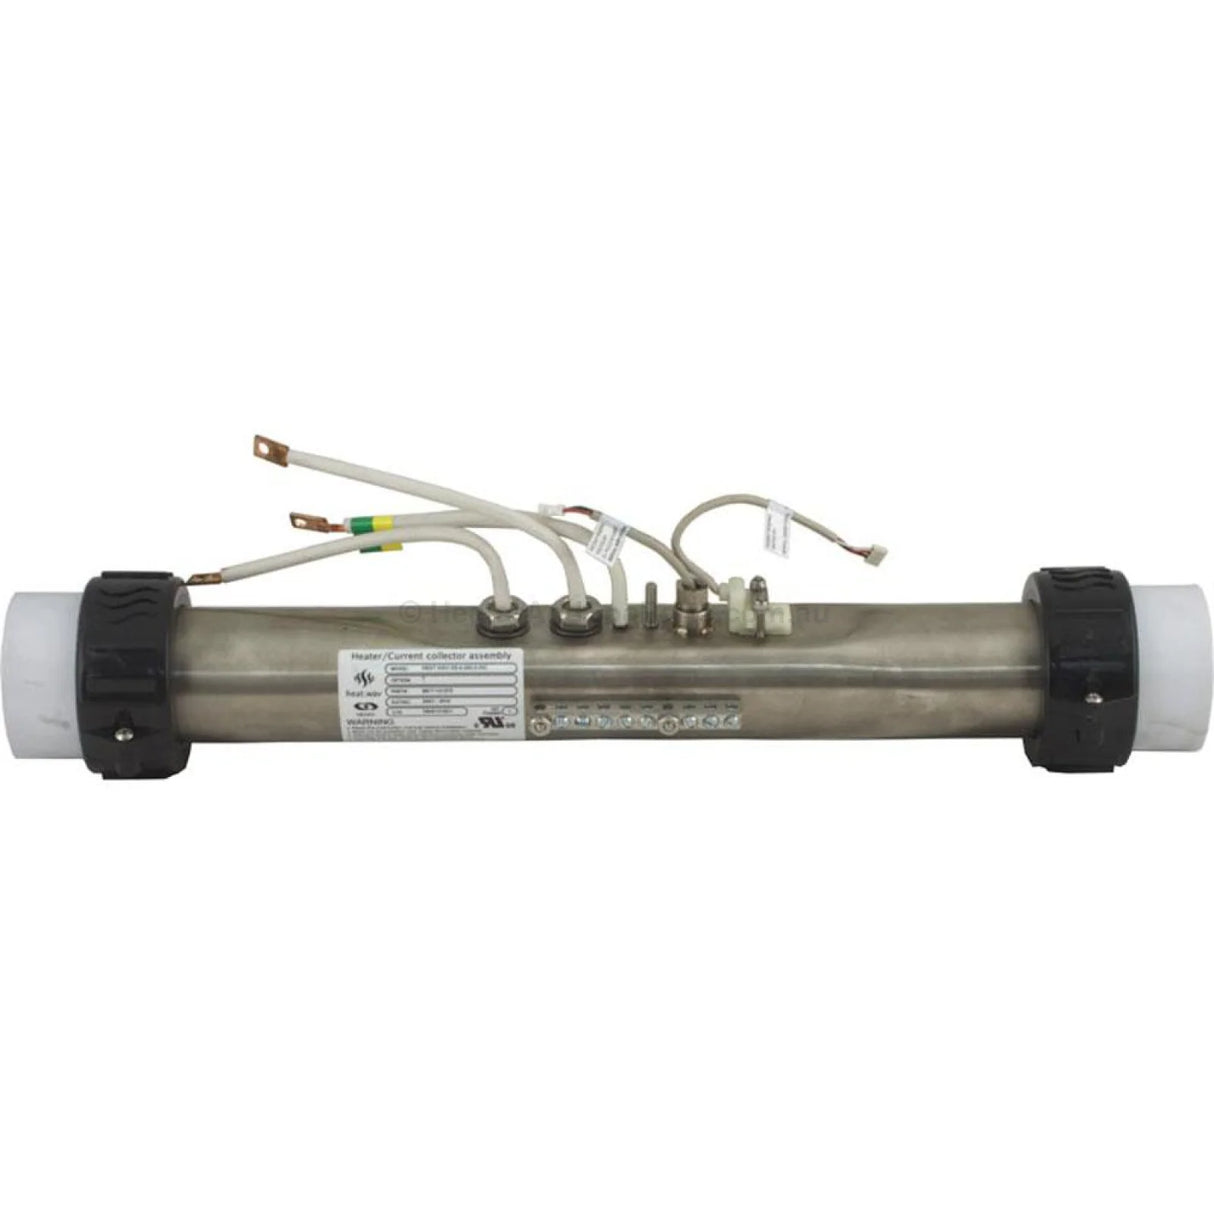 Gecko AEware in.xe & in.ye heater assembly - 2.0 or 4.0 kW - Complete - Heater and Spa Parts